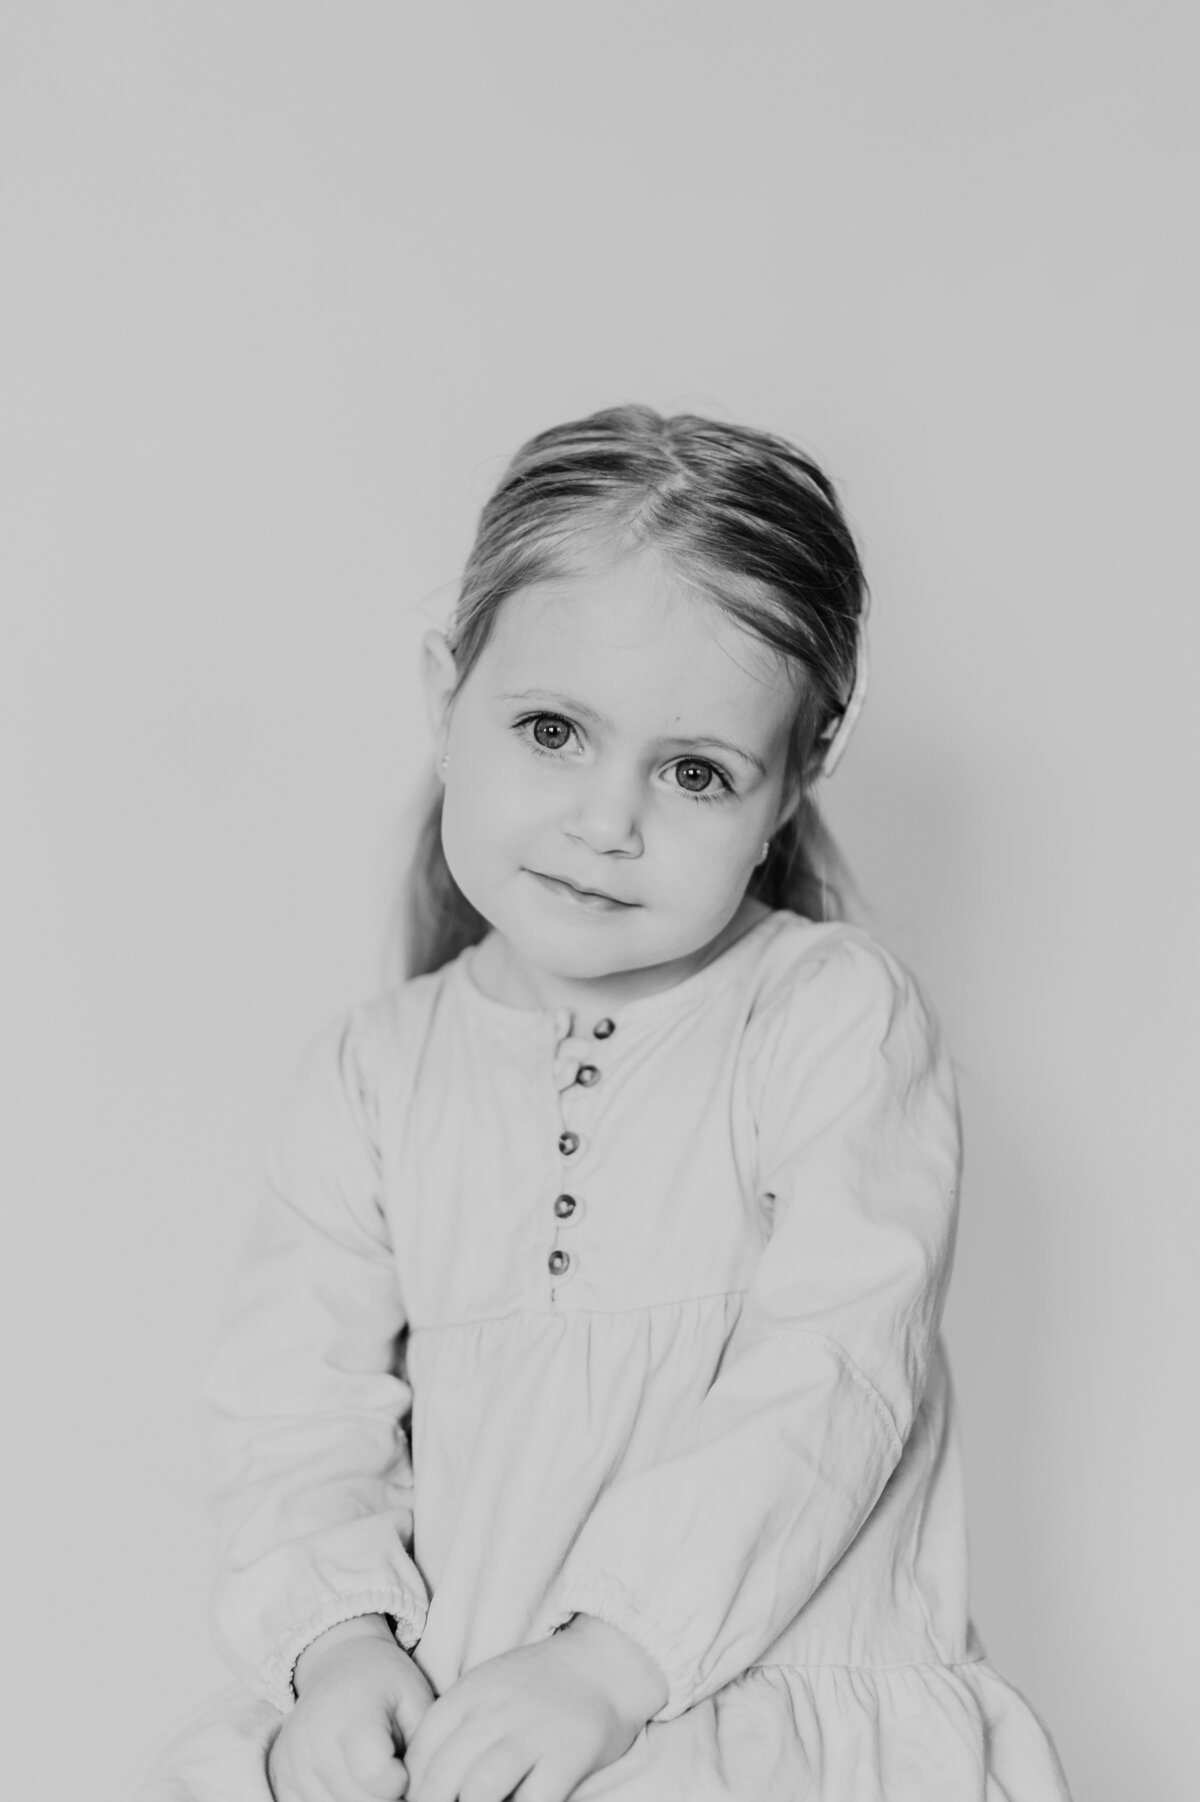 Let your child's personality shine through! St. Paul's premier Personality Portrait Mini Sessions are here for a limited time. Reserve your spot and capture the magic!